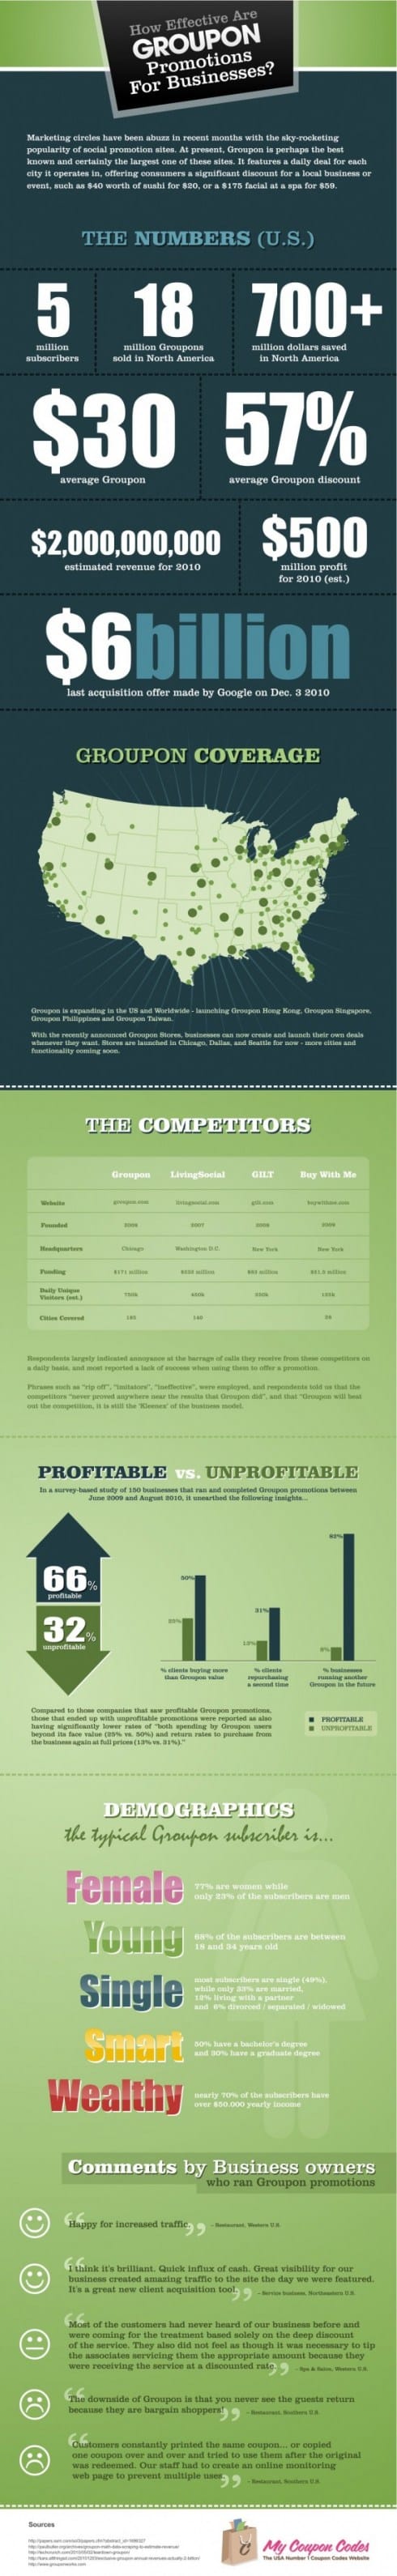 groupon by the numbers infographic1